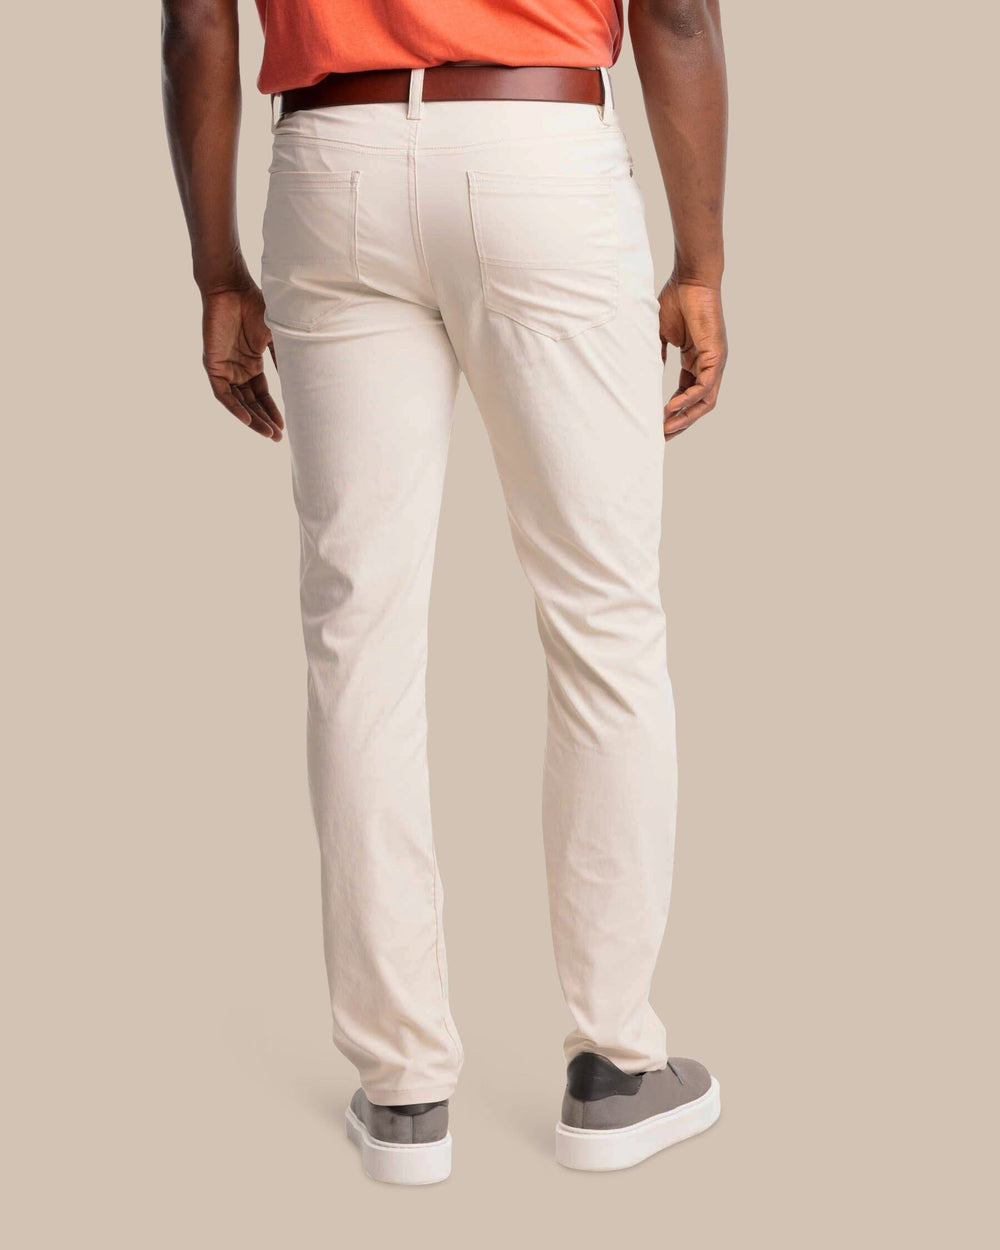 The back view of the Southern Tide Intercoastal Performance Pant by Southern Tide - Stone